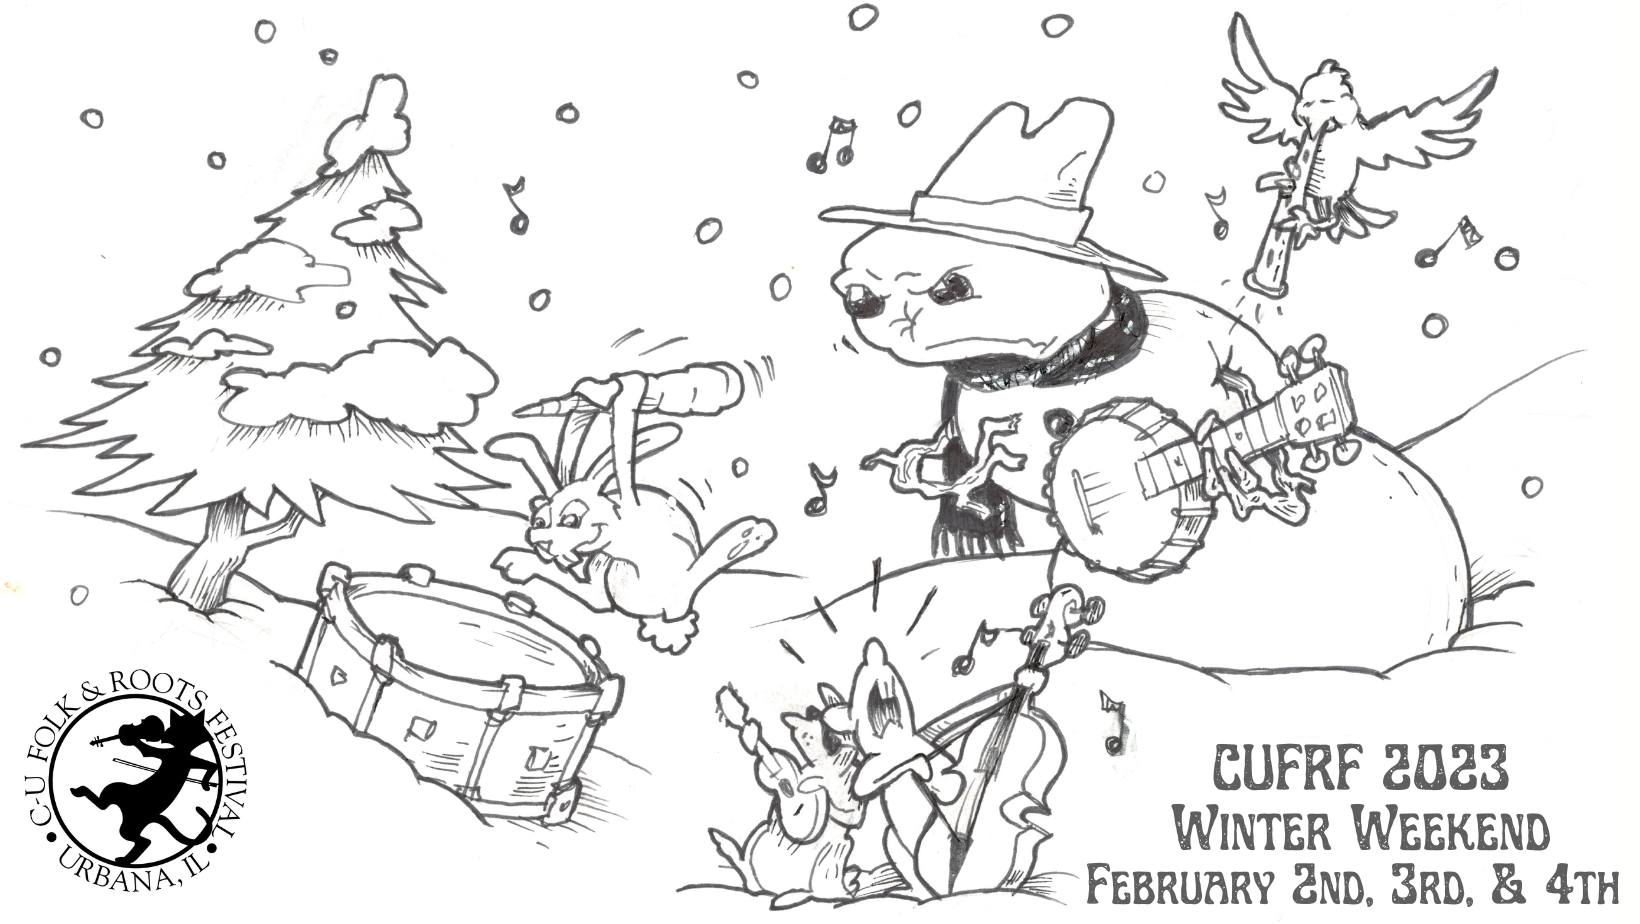 Black and white line drawing of an angry looking snowman playing a banjo, a rabbit playing the drums with the snowman's carrot nose, a bird playing a recorder, and some squirrels playing the upright bass and a guitar. The scene is set in a snowy landscape.